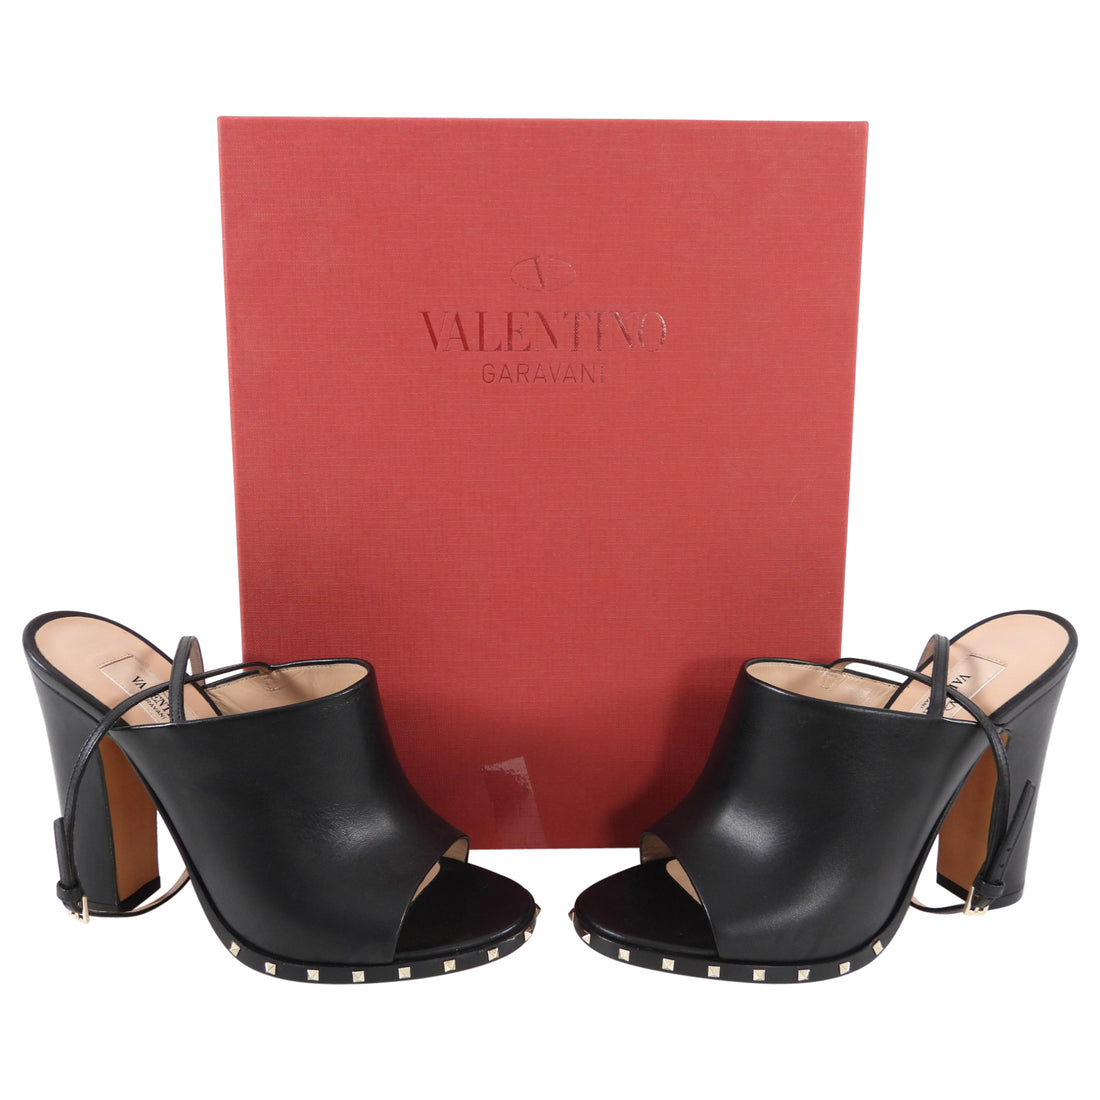 Valentino Rock Stud Black High Heel Mules with Ankle Strap - 6